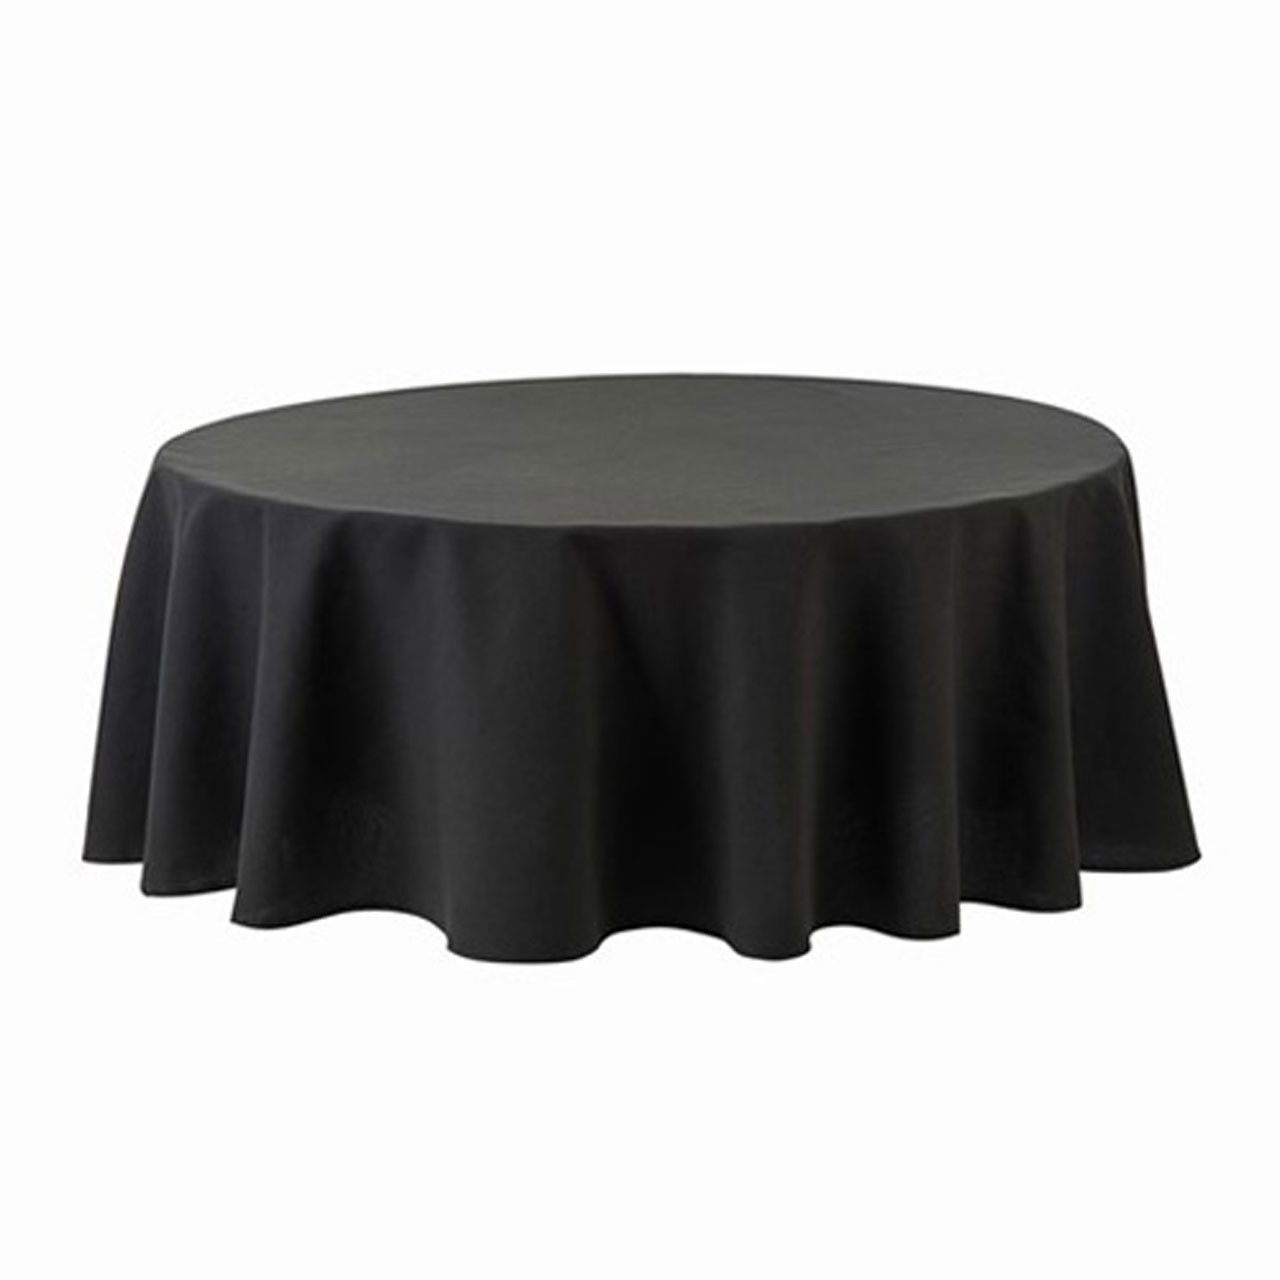 Is this black round tablecloth made of cotton?